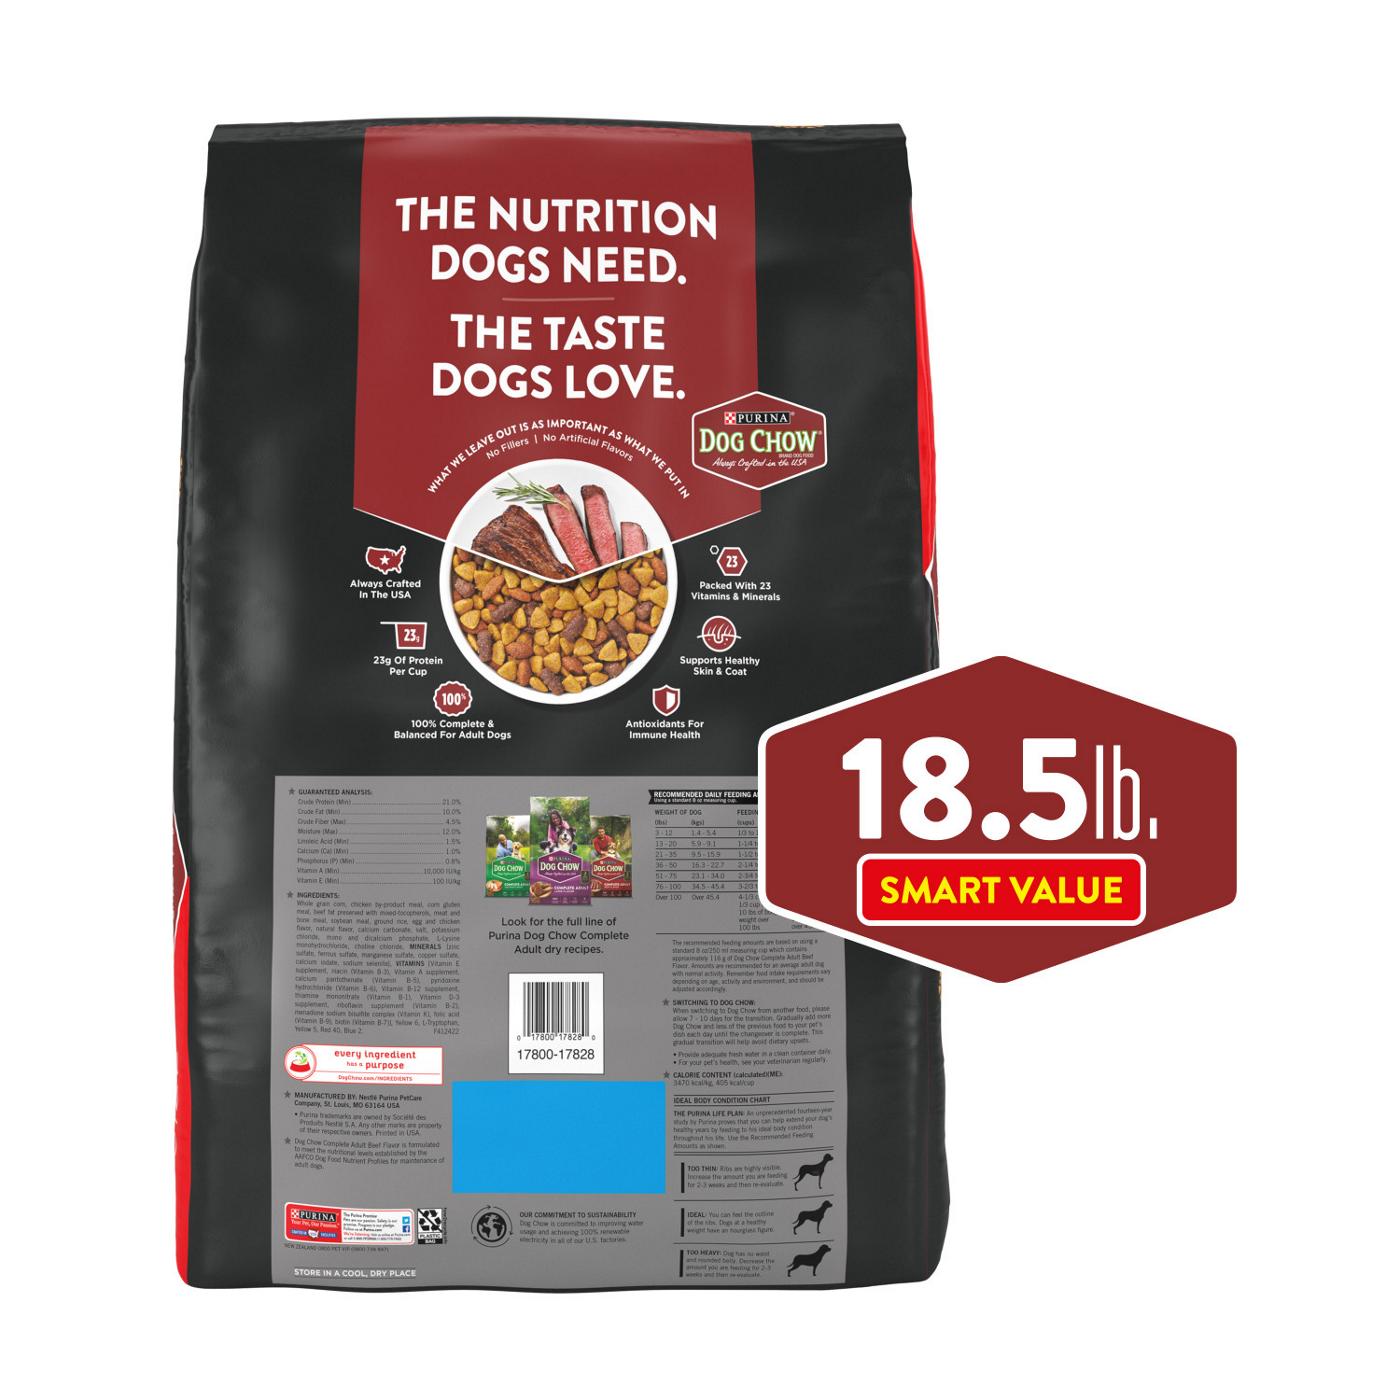 Dog Chow Purina Dog Chow Complete Adult Dry Dog Food Kibble Beef Flavor; image 2 of 7